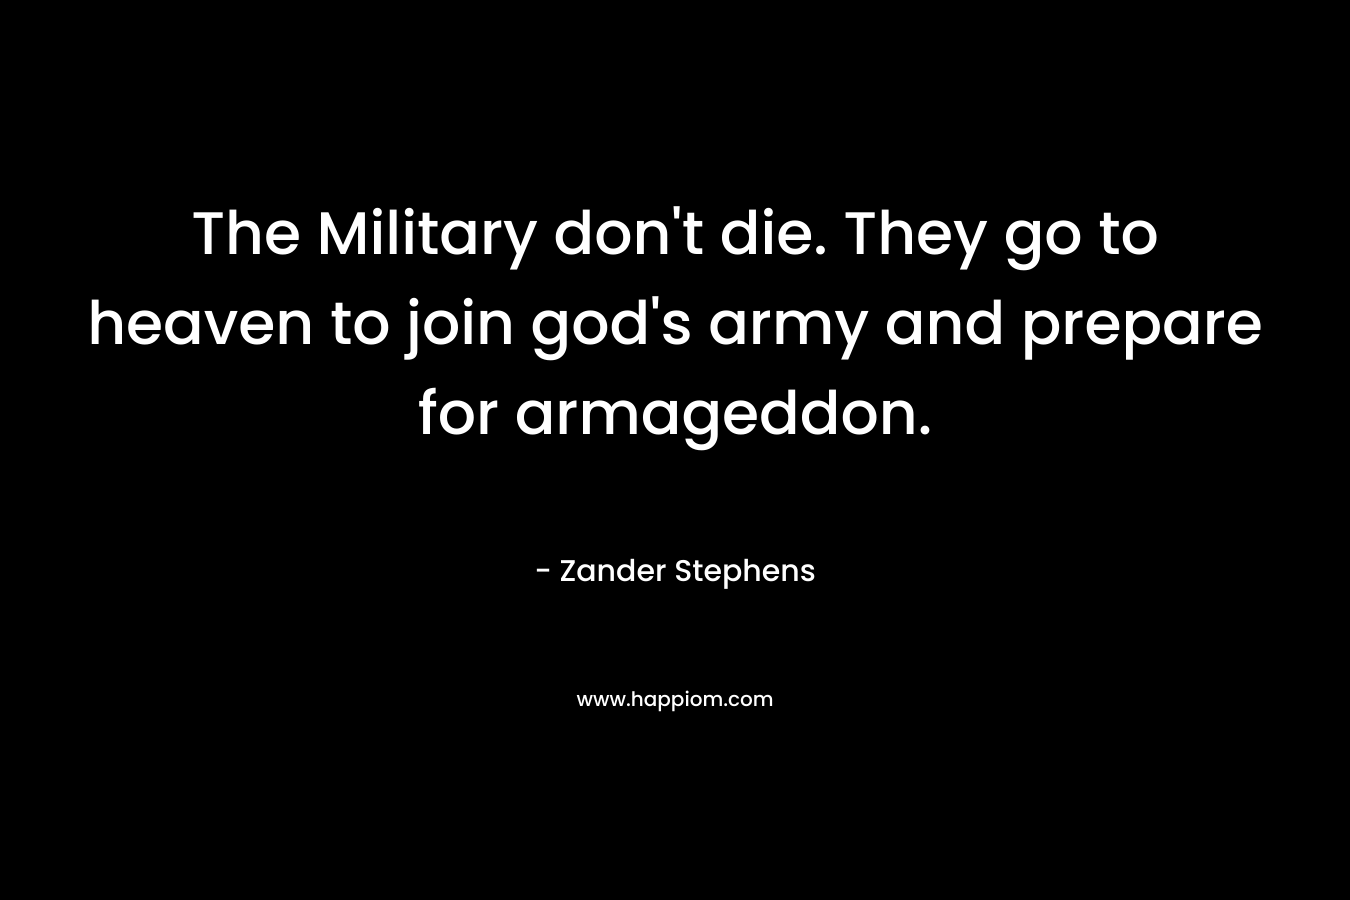 The Military don’t die. They go to heaven to join god’s army and prepare for armageddon. – Zander Stephens